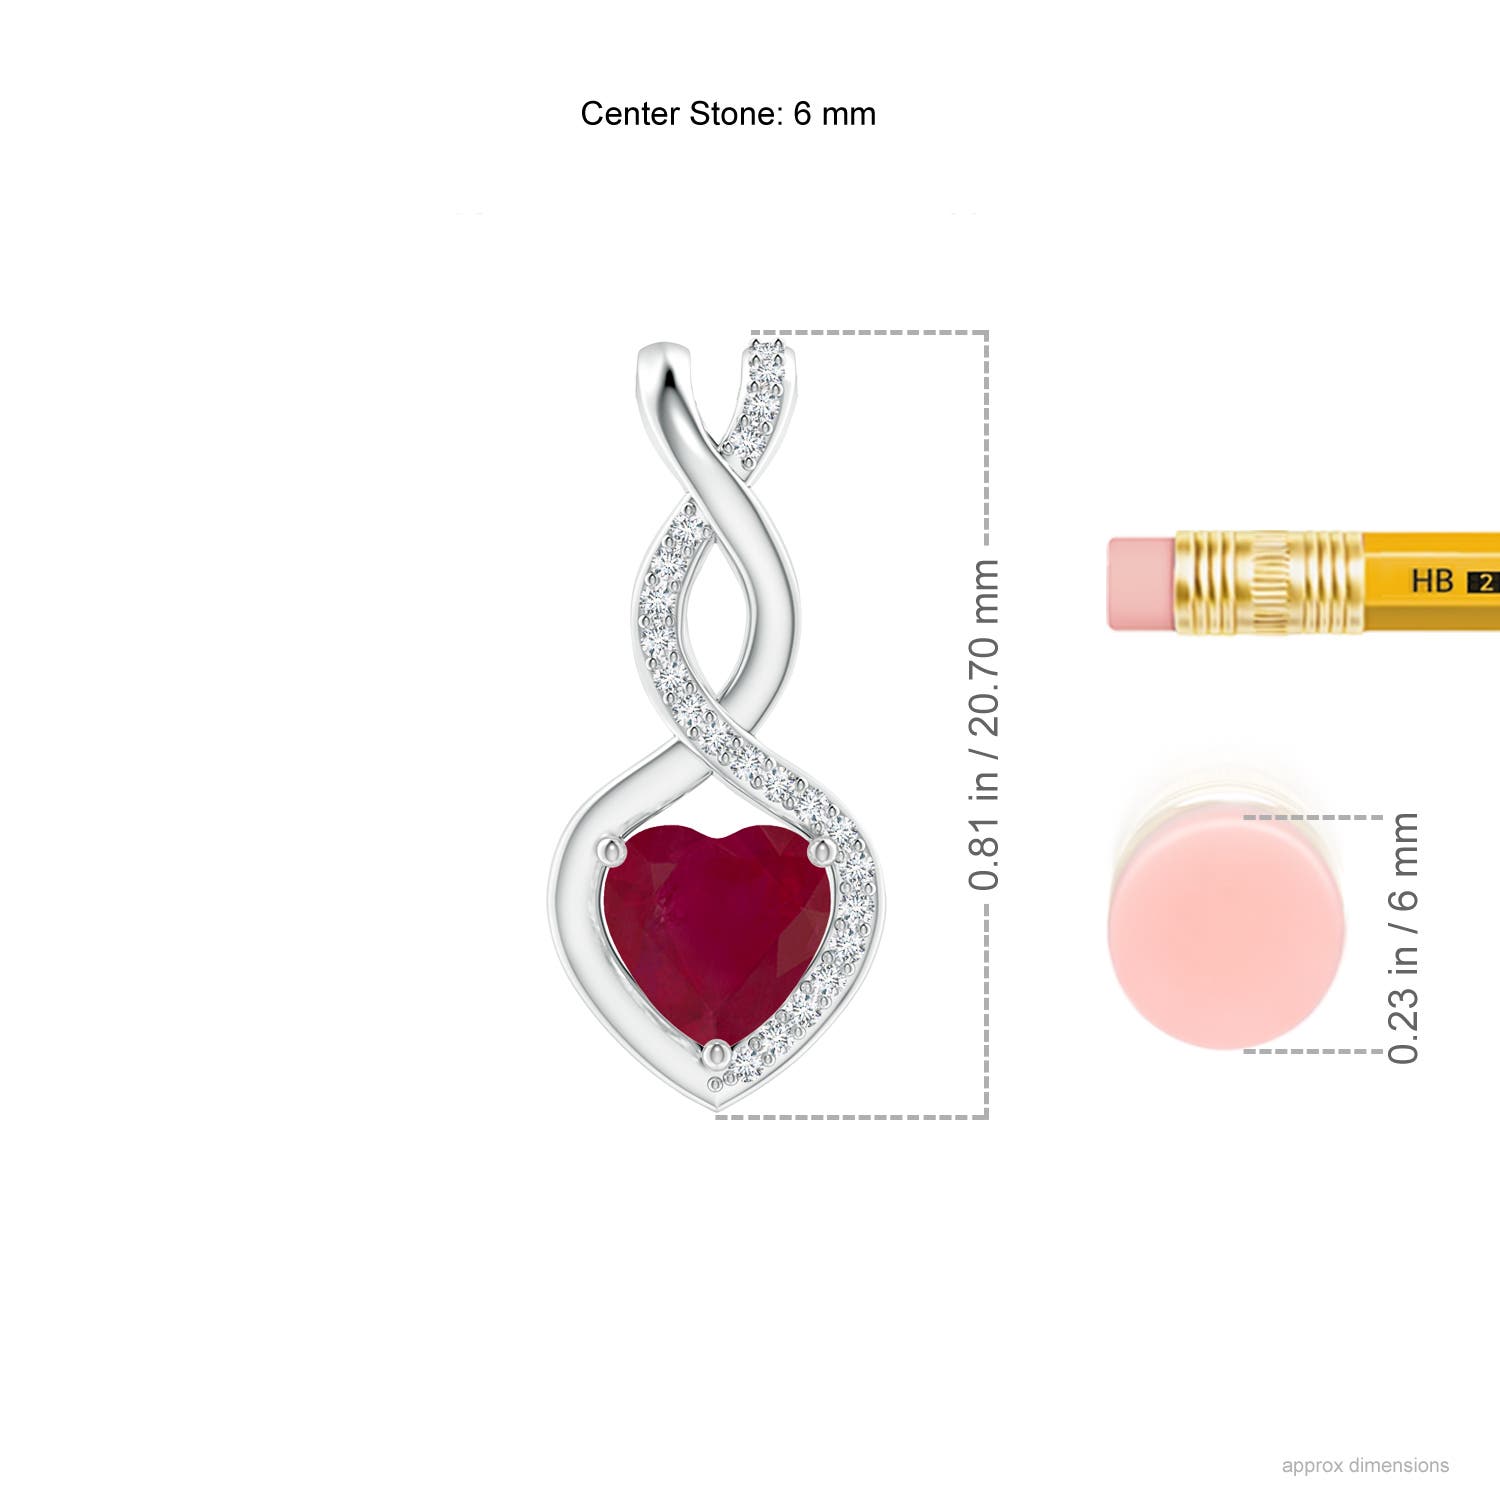 A - Ruby / 0.88 CT / 14 KT White Gold